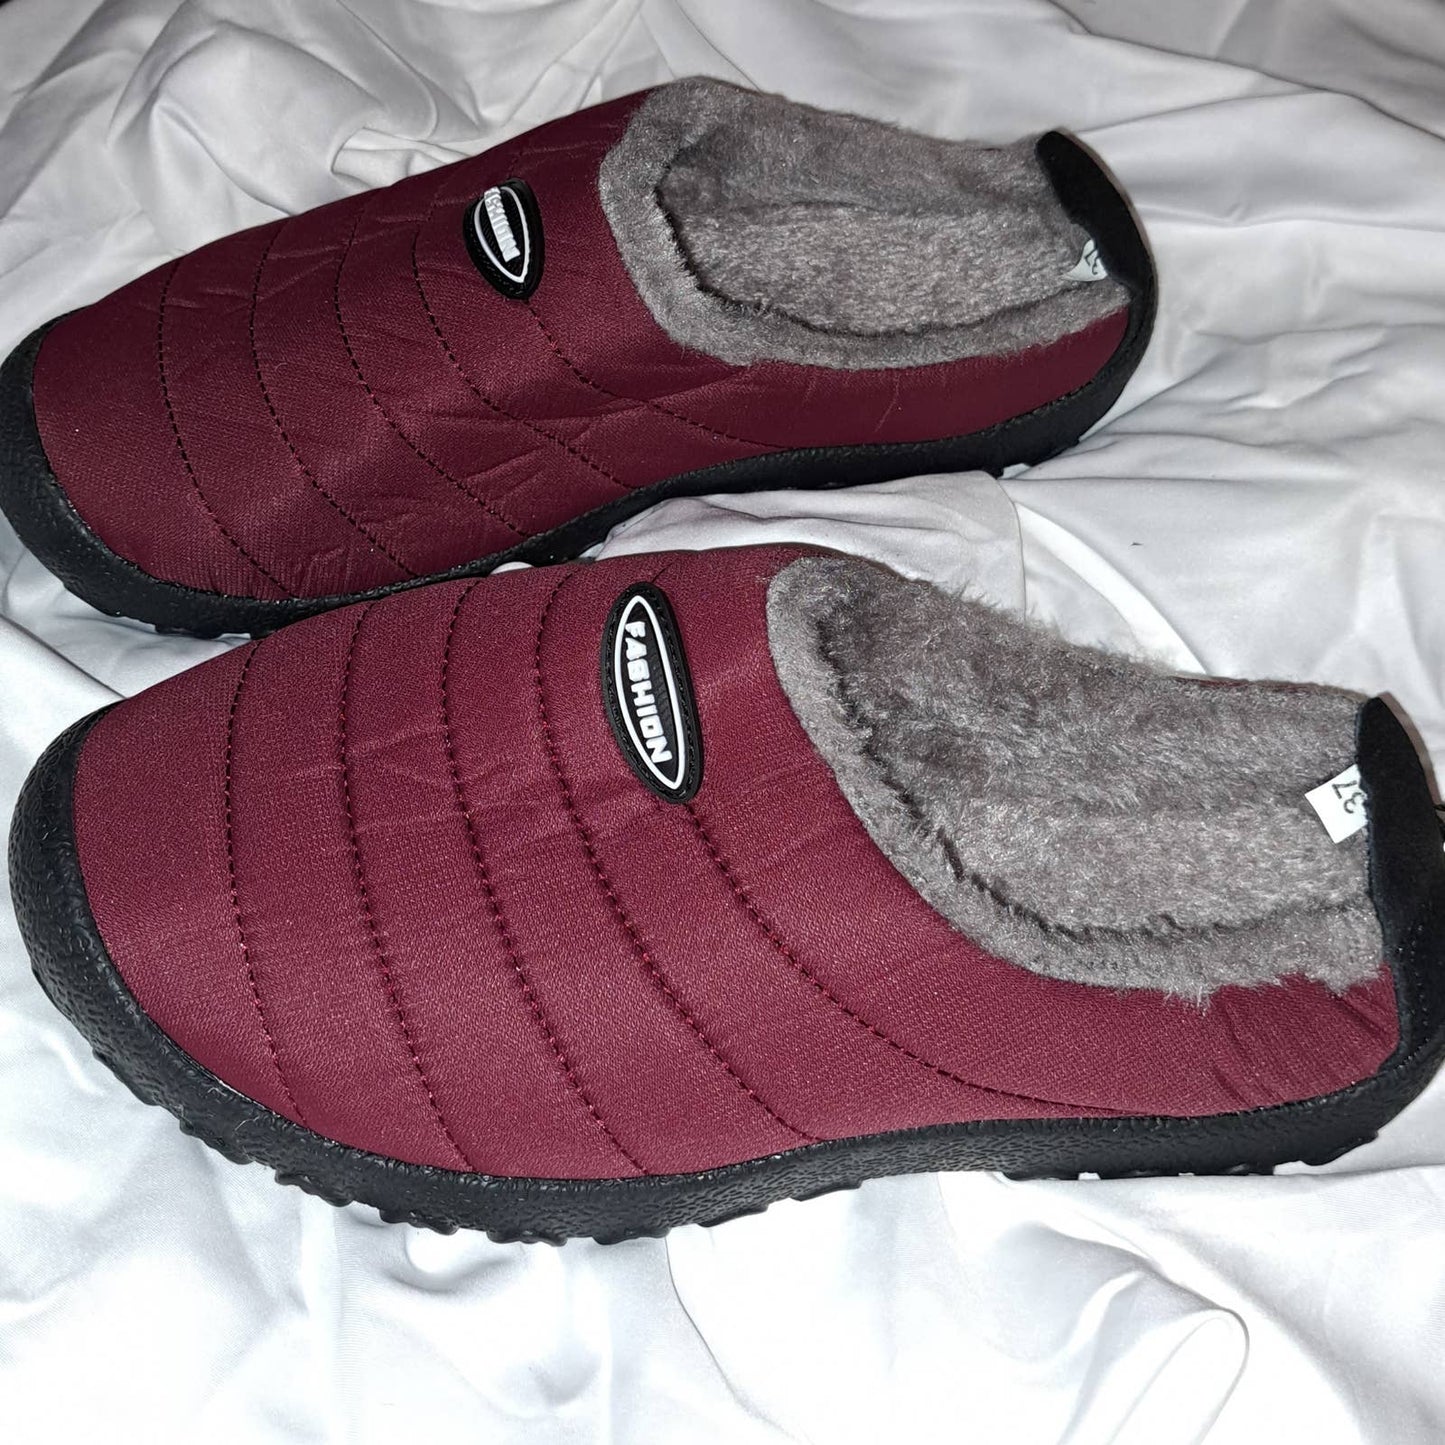 NEW - Most COMFY slippers! Fur Lined Indoor or Outdoor SZ 6.5-7